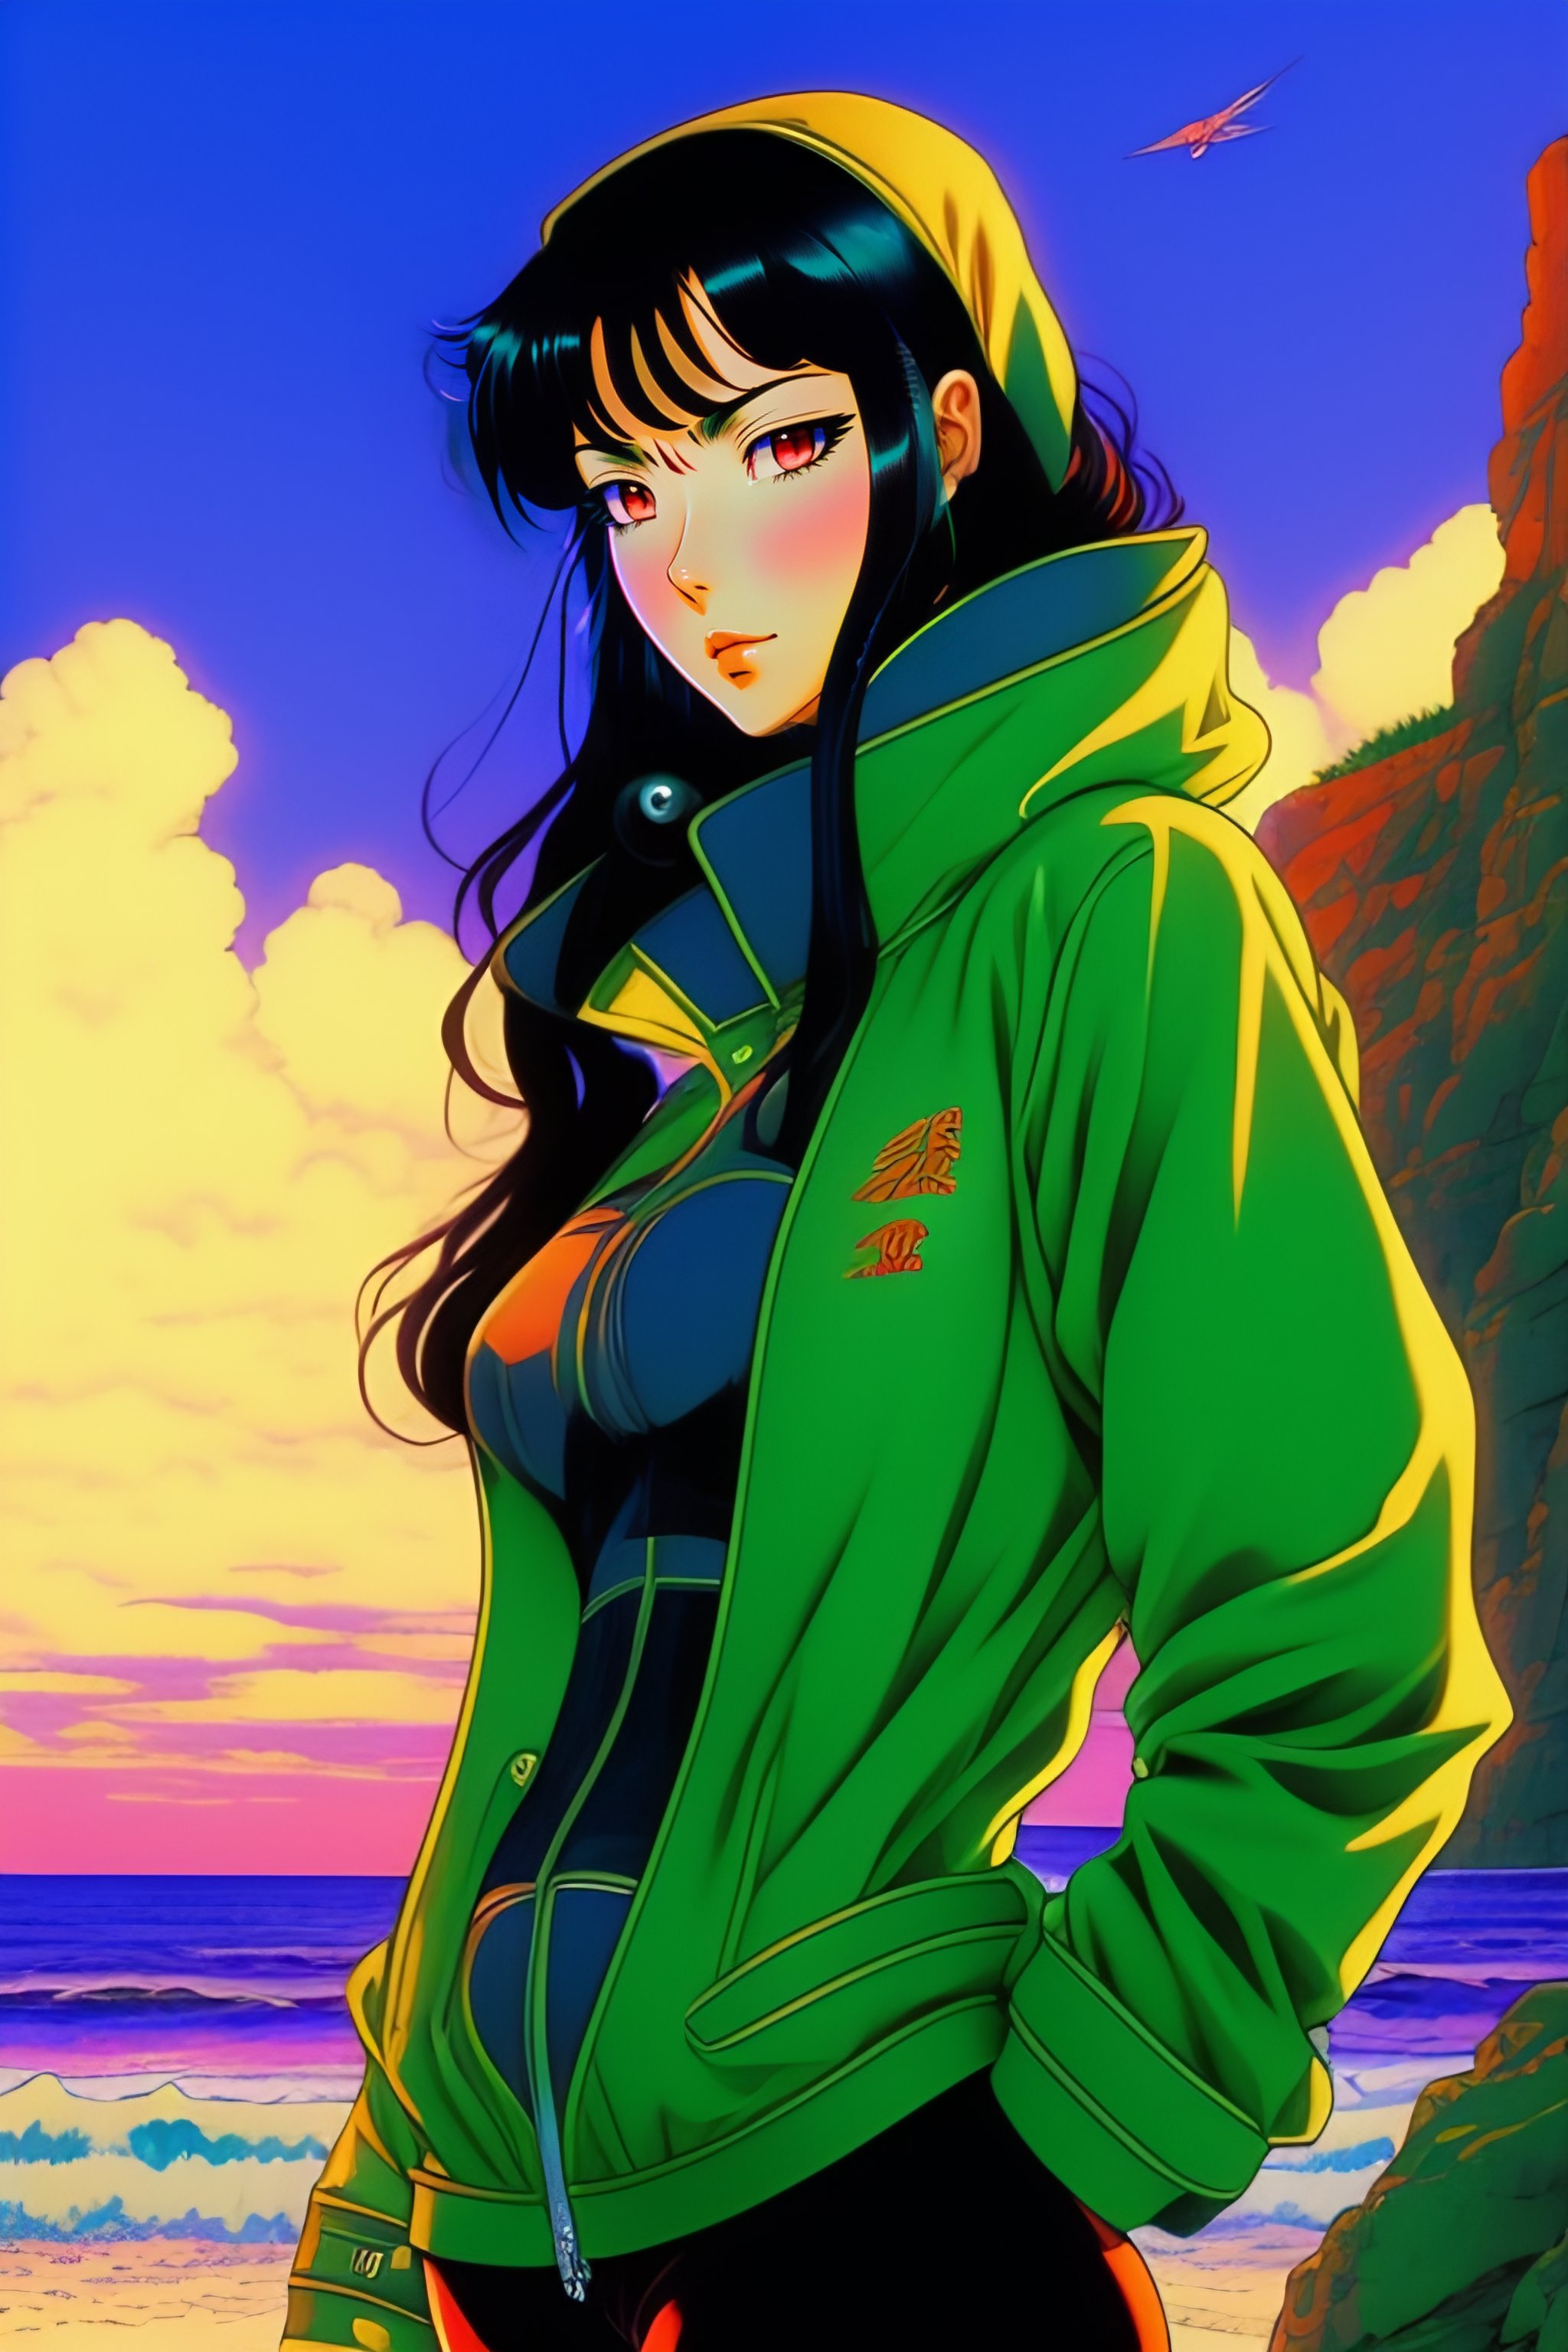 Lexica - Vintage 90's anime style. Somber moaning woman with black hair ...